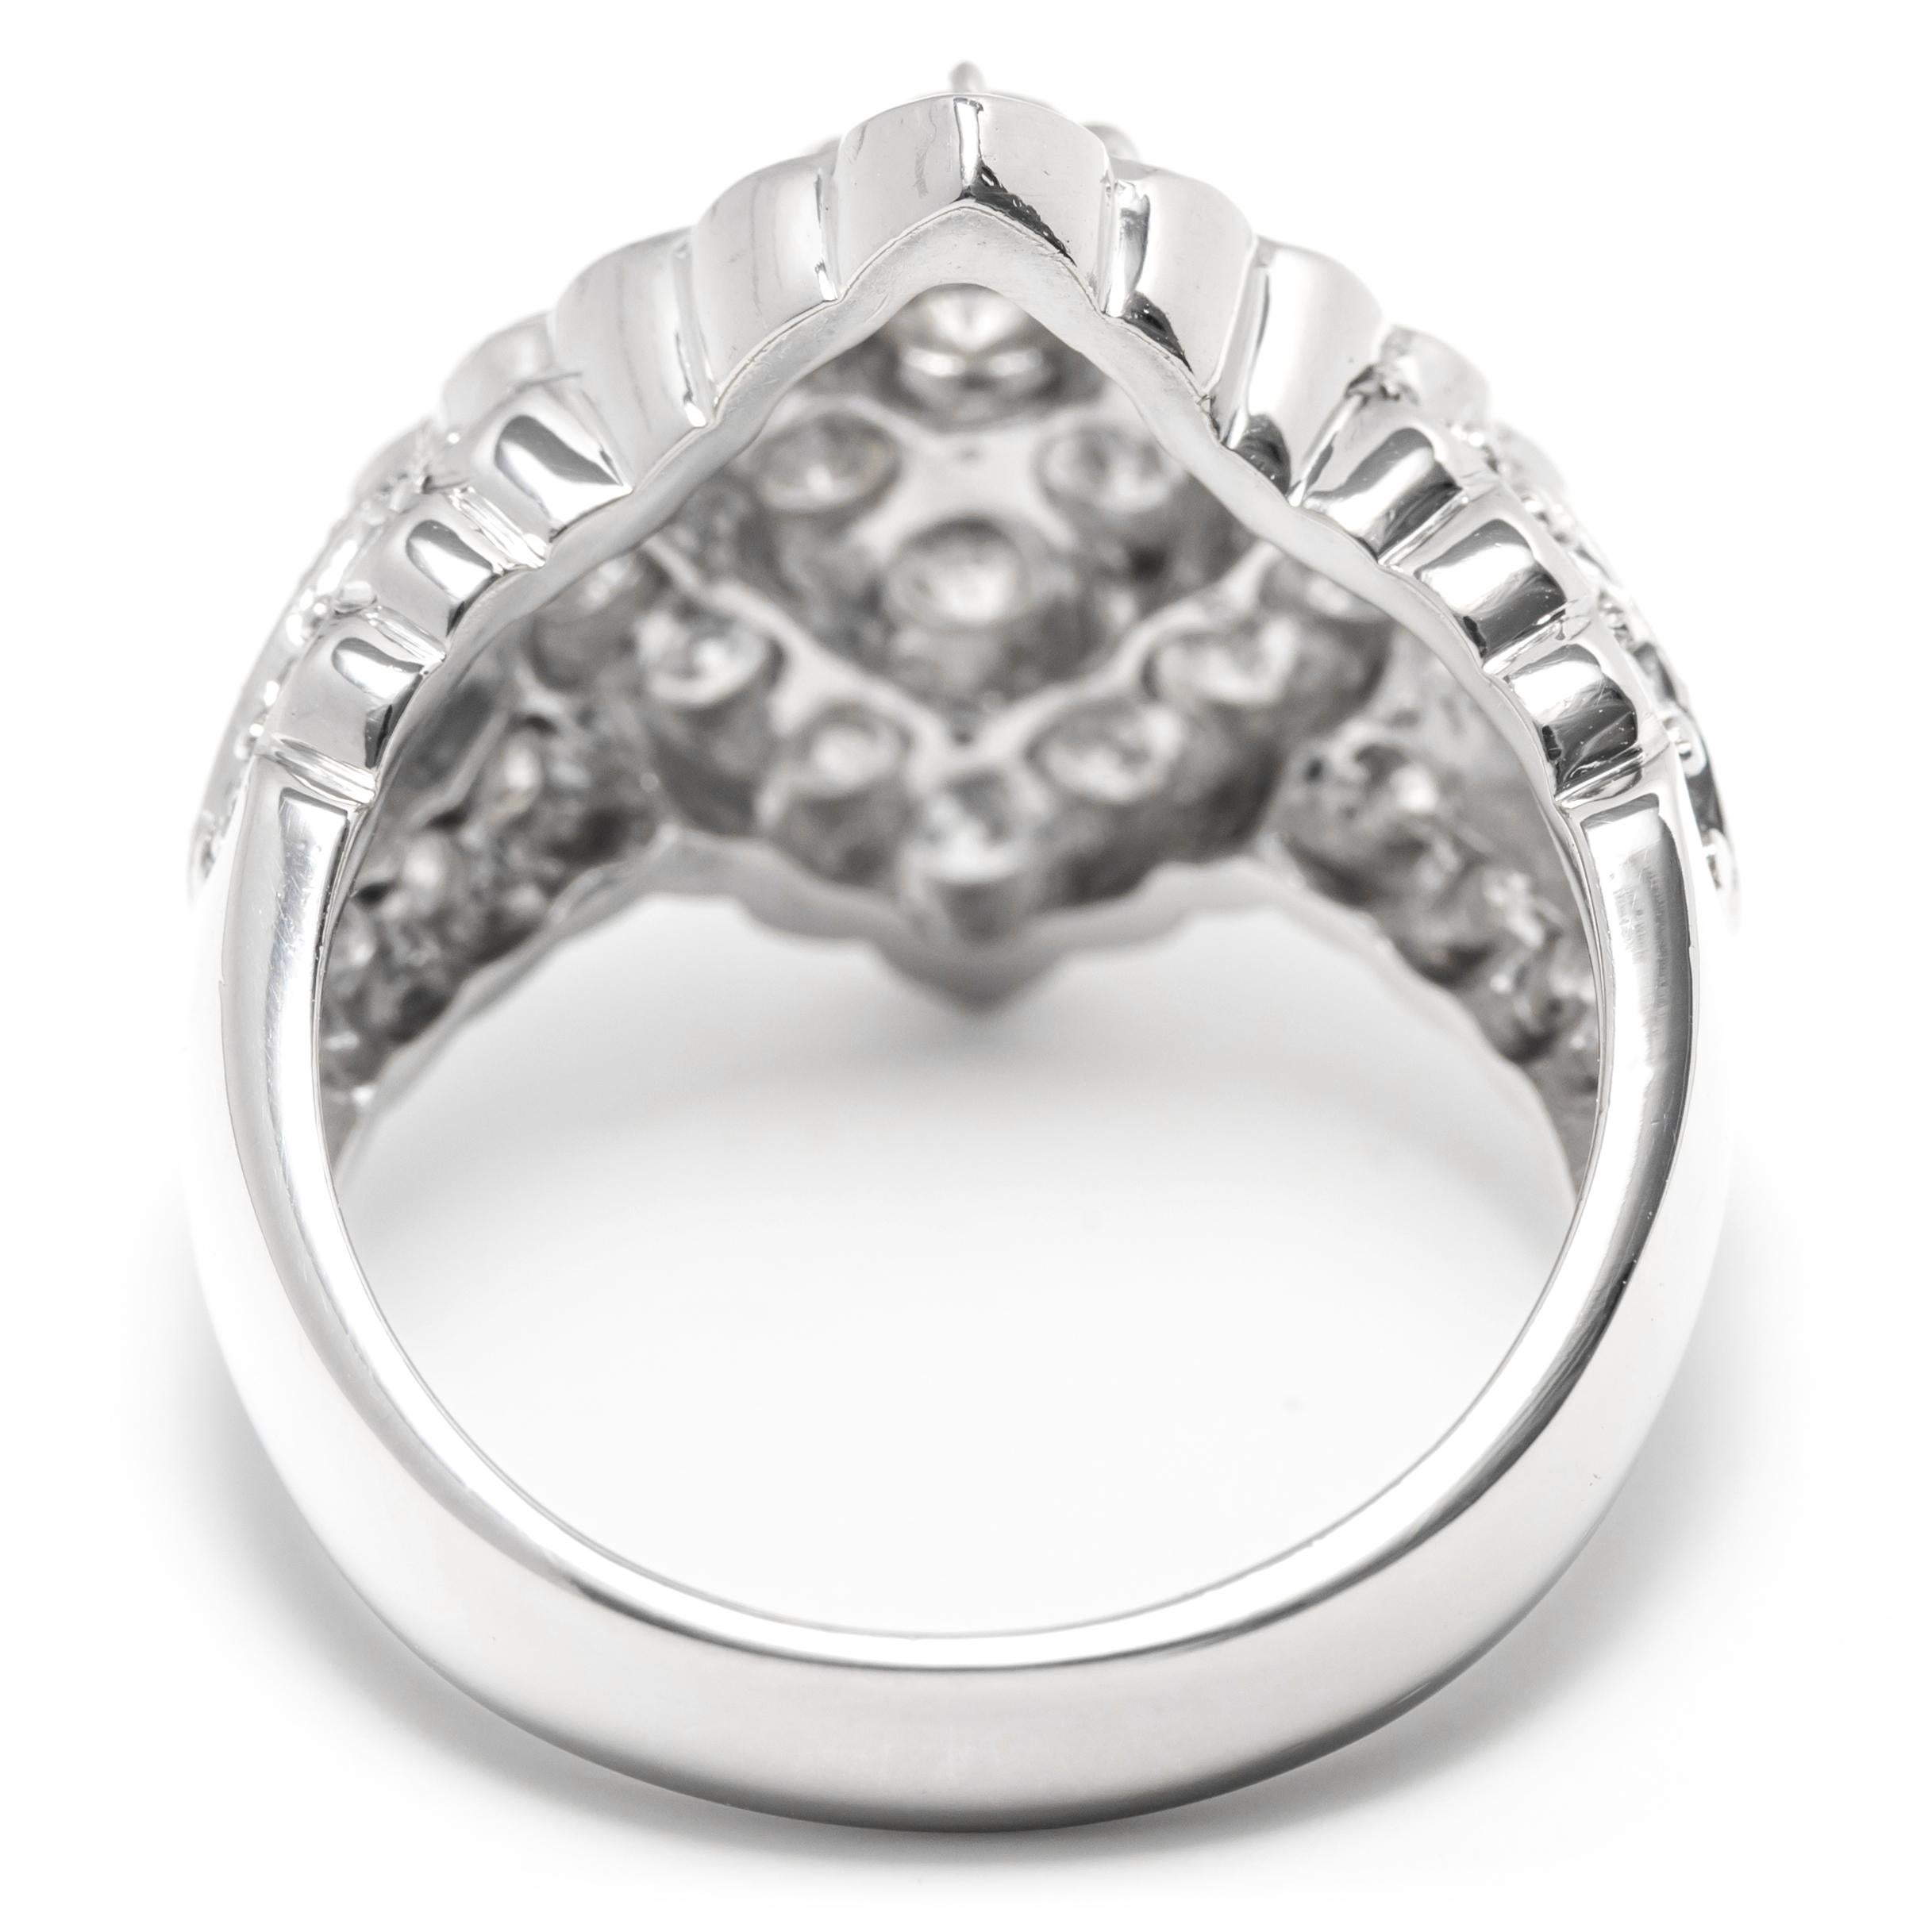 Women's 2.50 ct Natural White Diamonds Cluster Ring For Sale